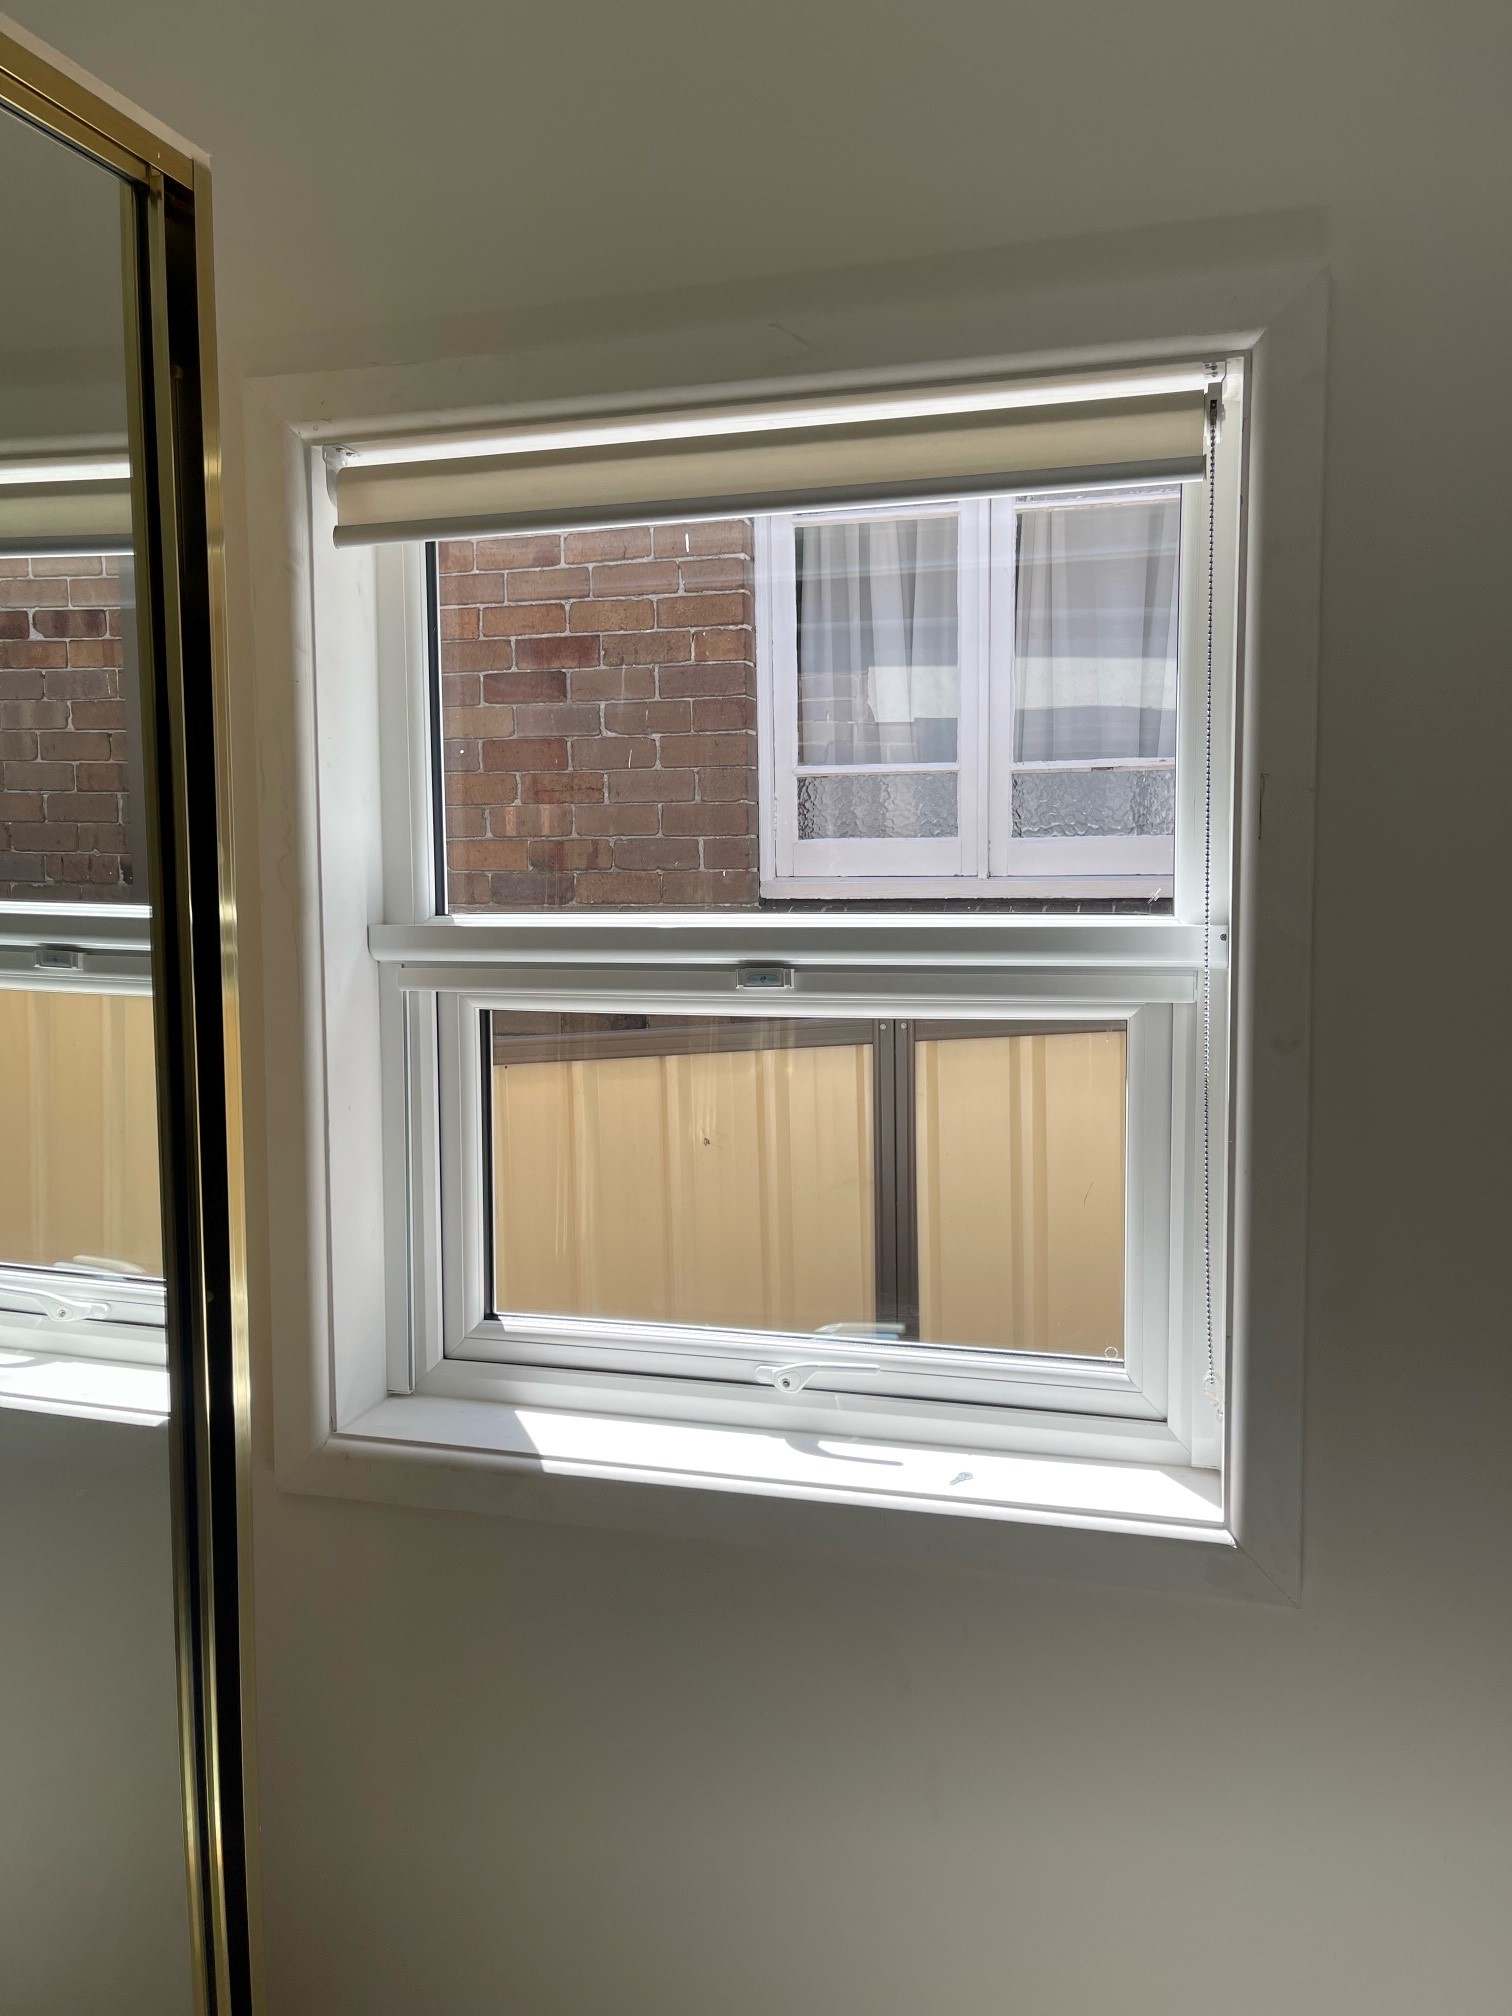 double glazed and blind between glass